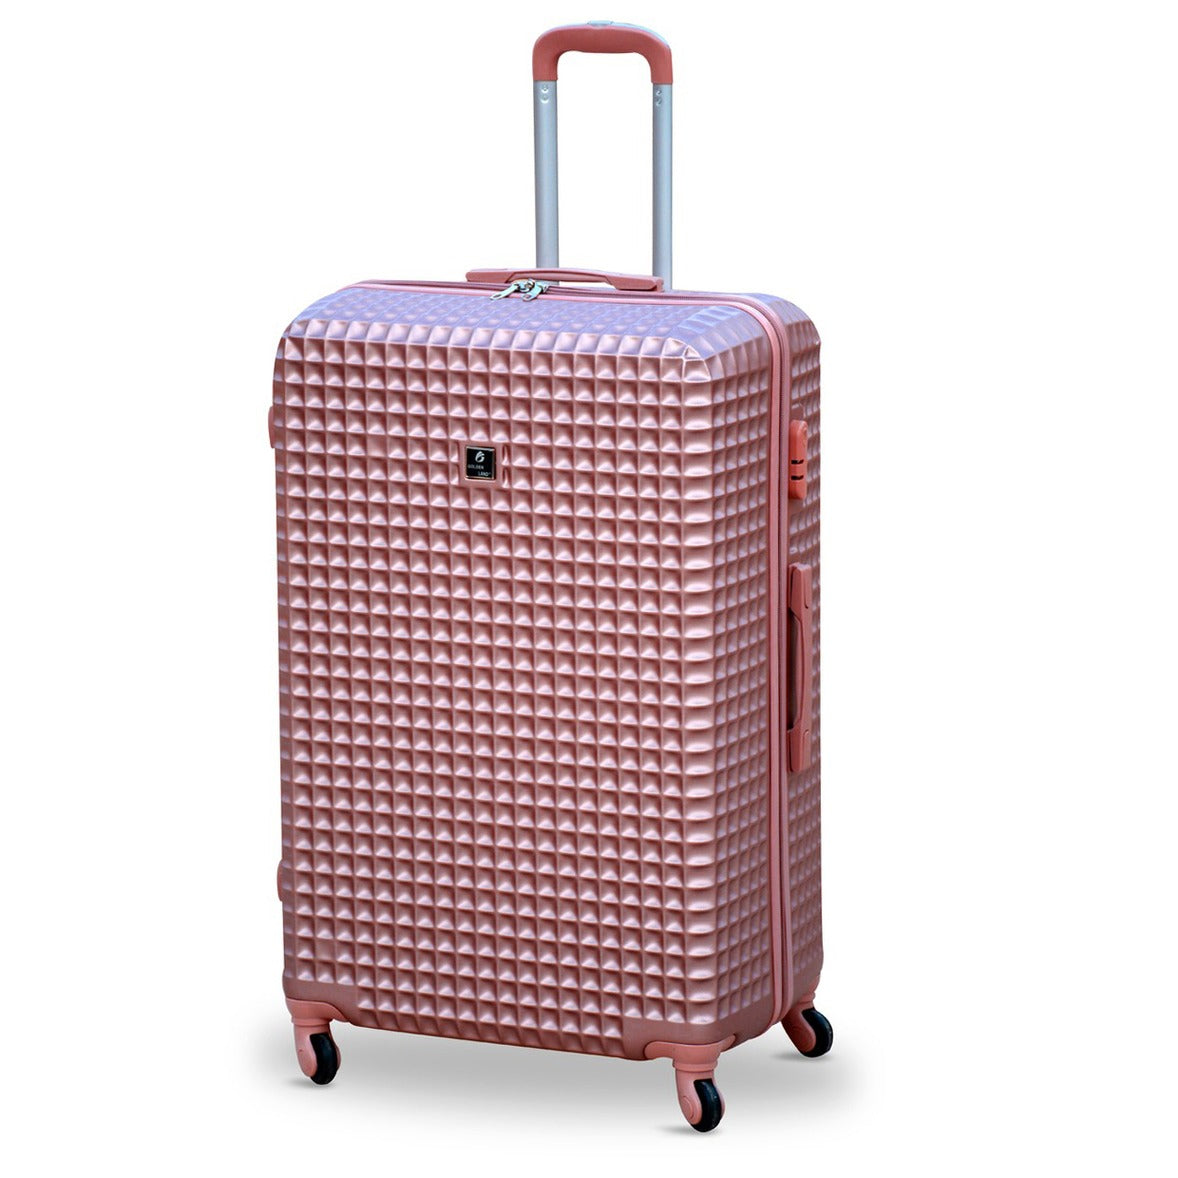 4 Piece Set 7" 20" 24" 28 Inches Rose Gold Colour Square Cut ABS Luggage Lightweight Hard Case Trolley Bag | 2 Year Warranty